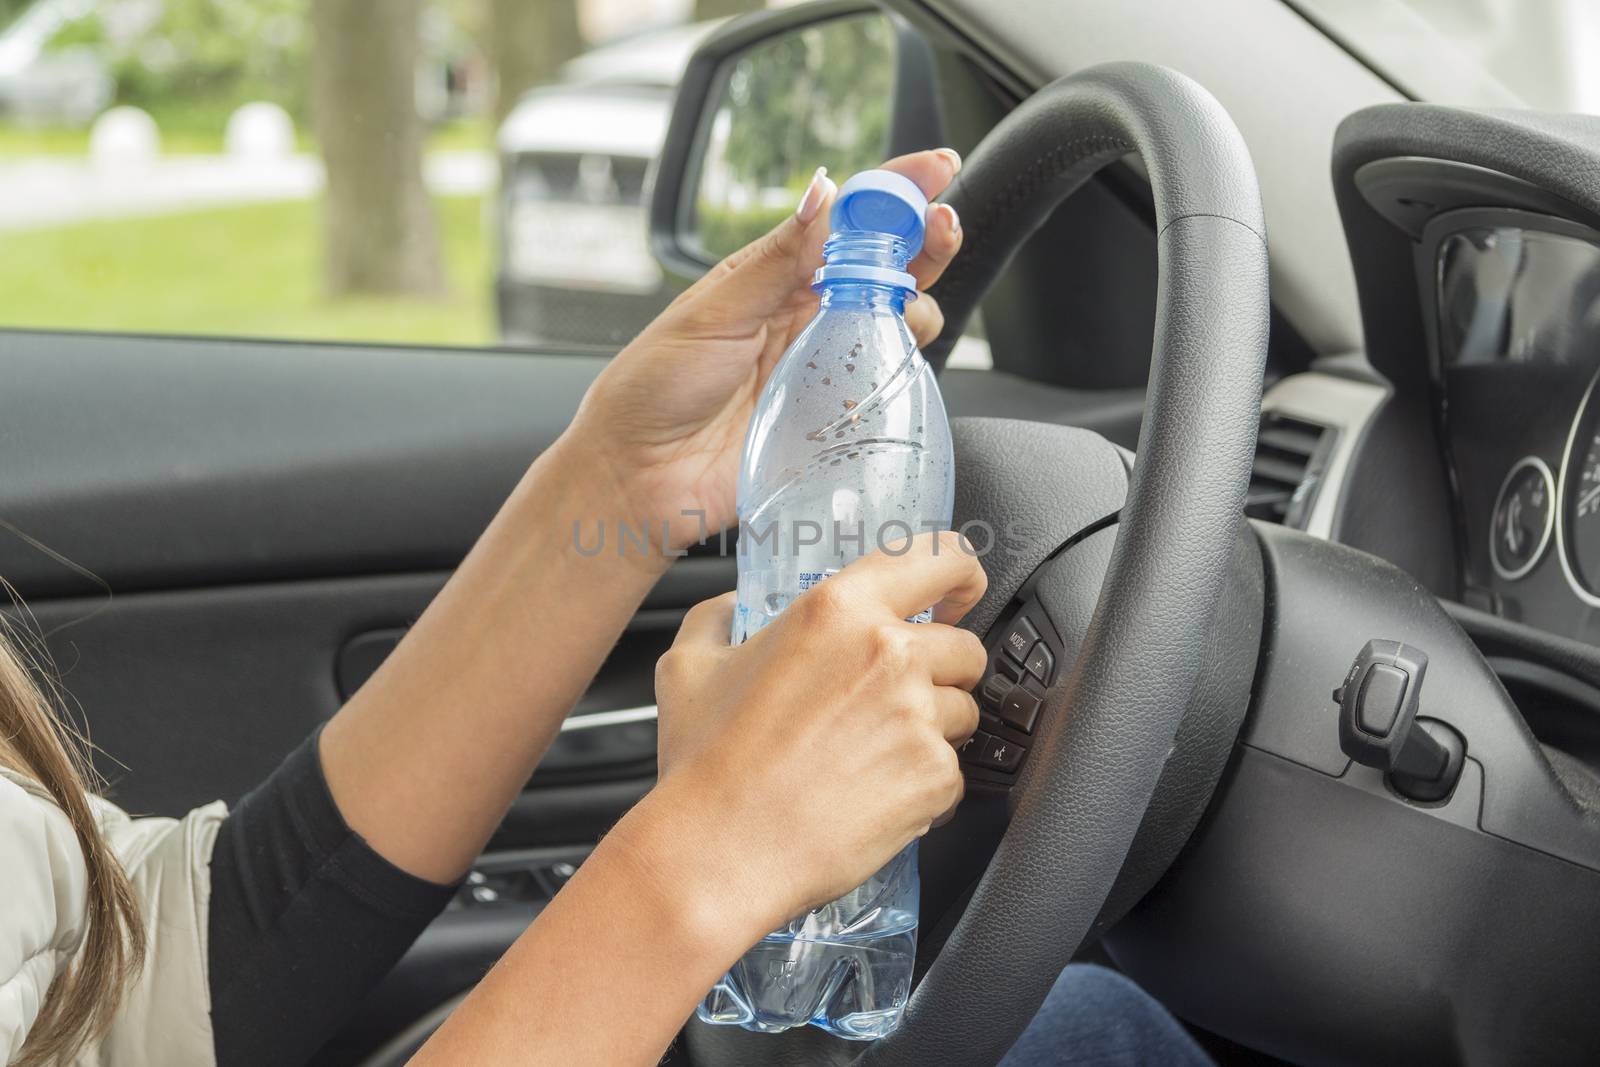 the girl in the cabin of the car holding a bottle of water